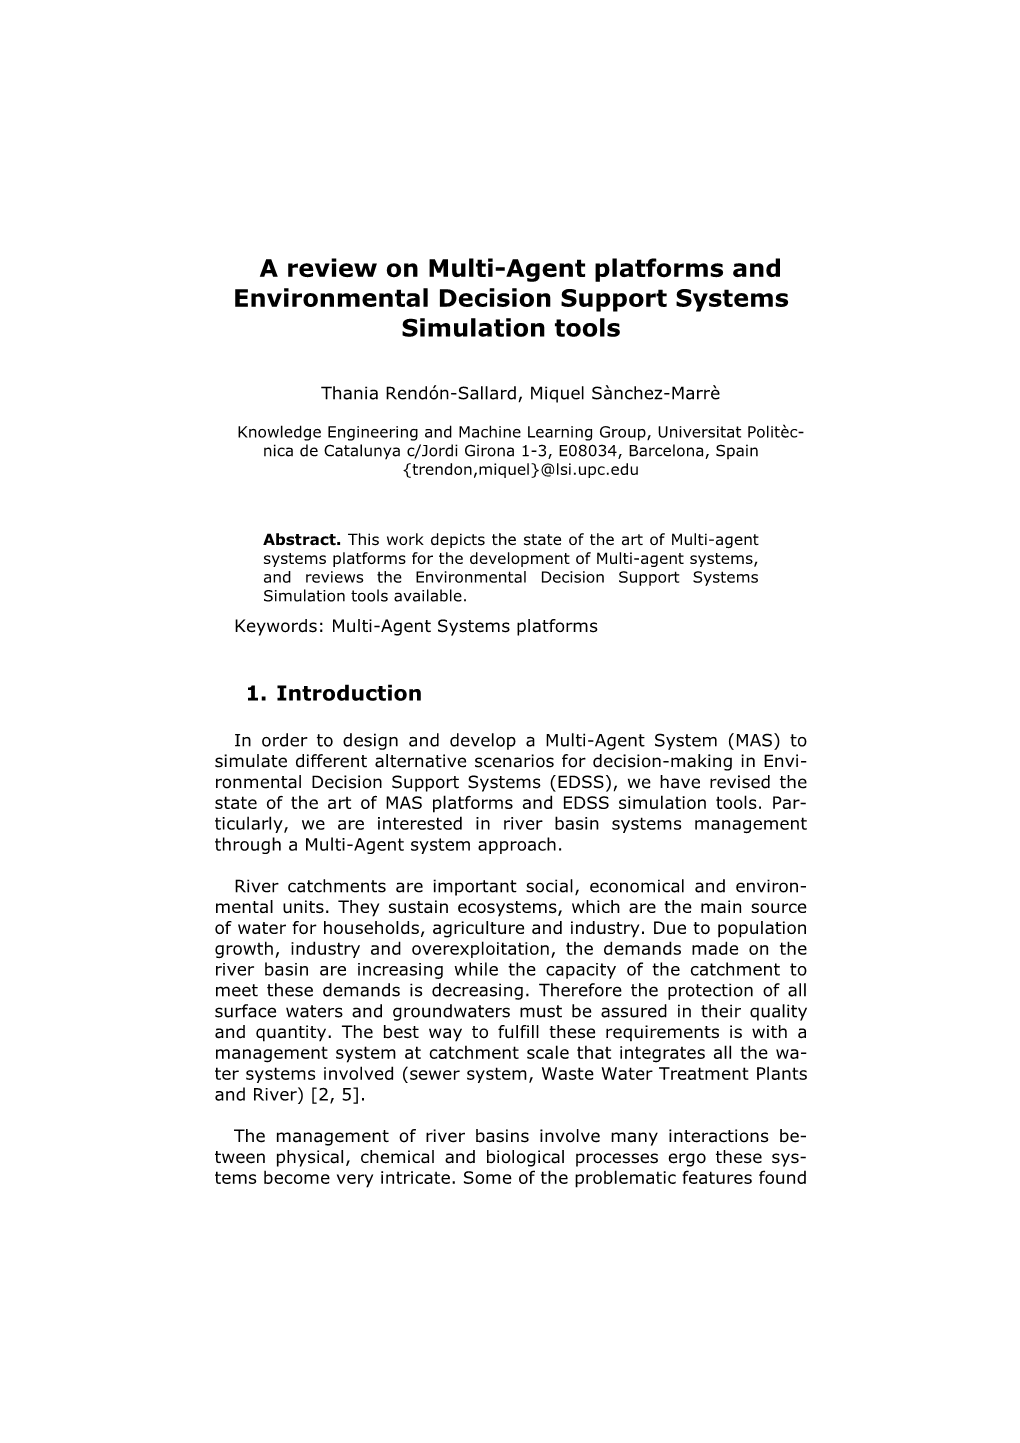 A Review on Multi-Agent Platforms and Environmental Decision Support Systems Simulation Tools